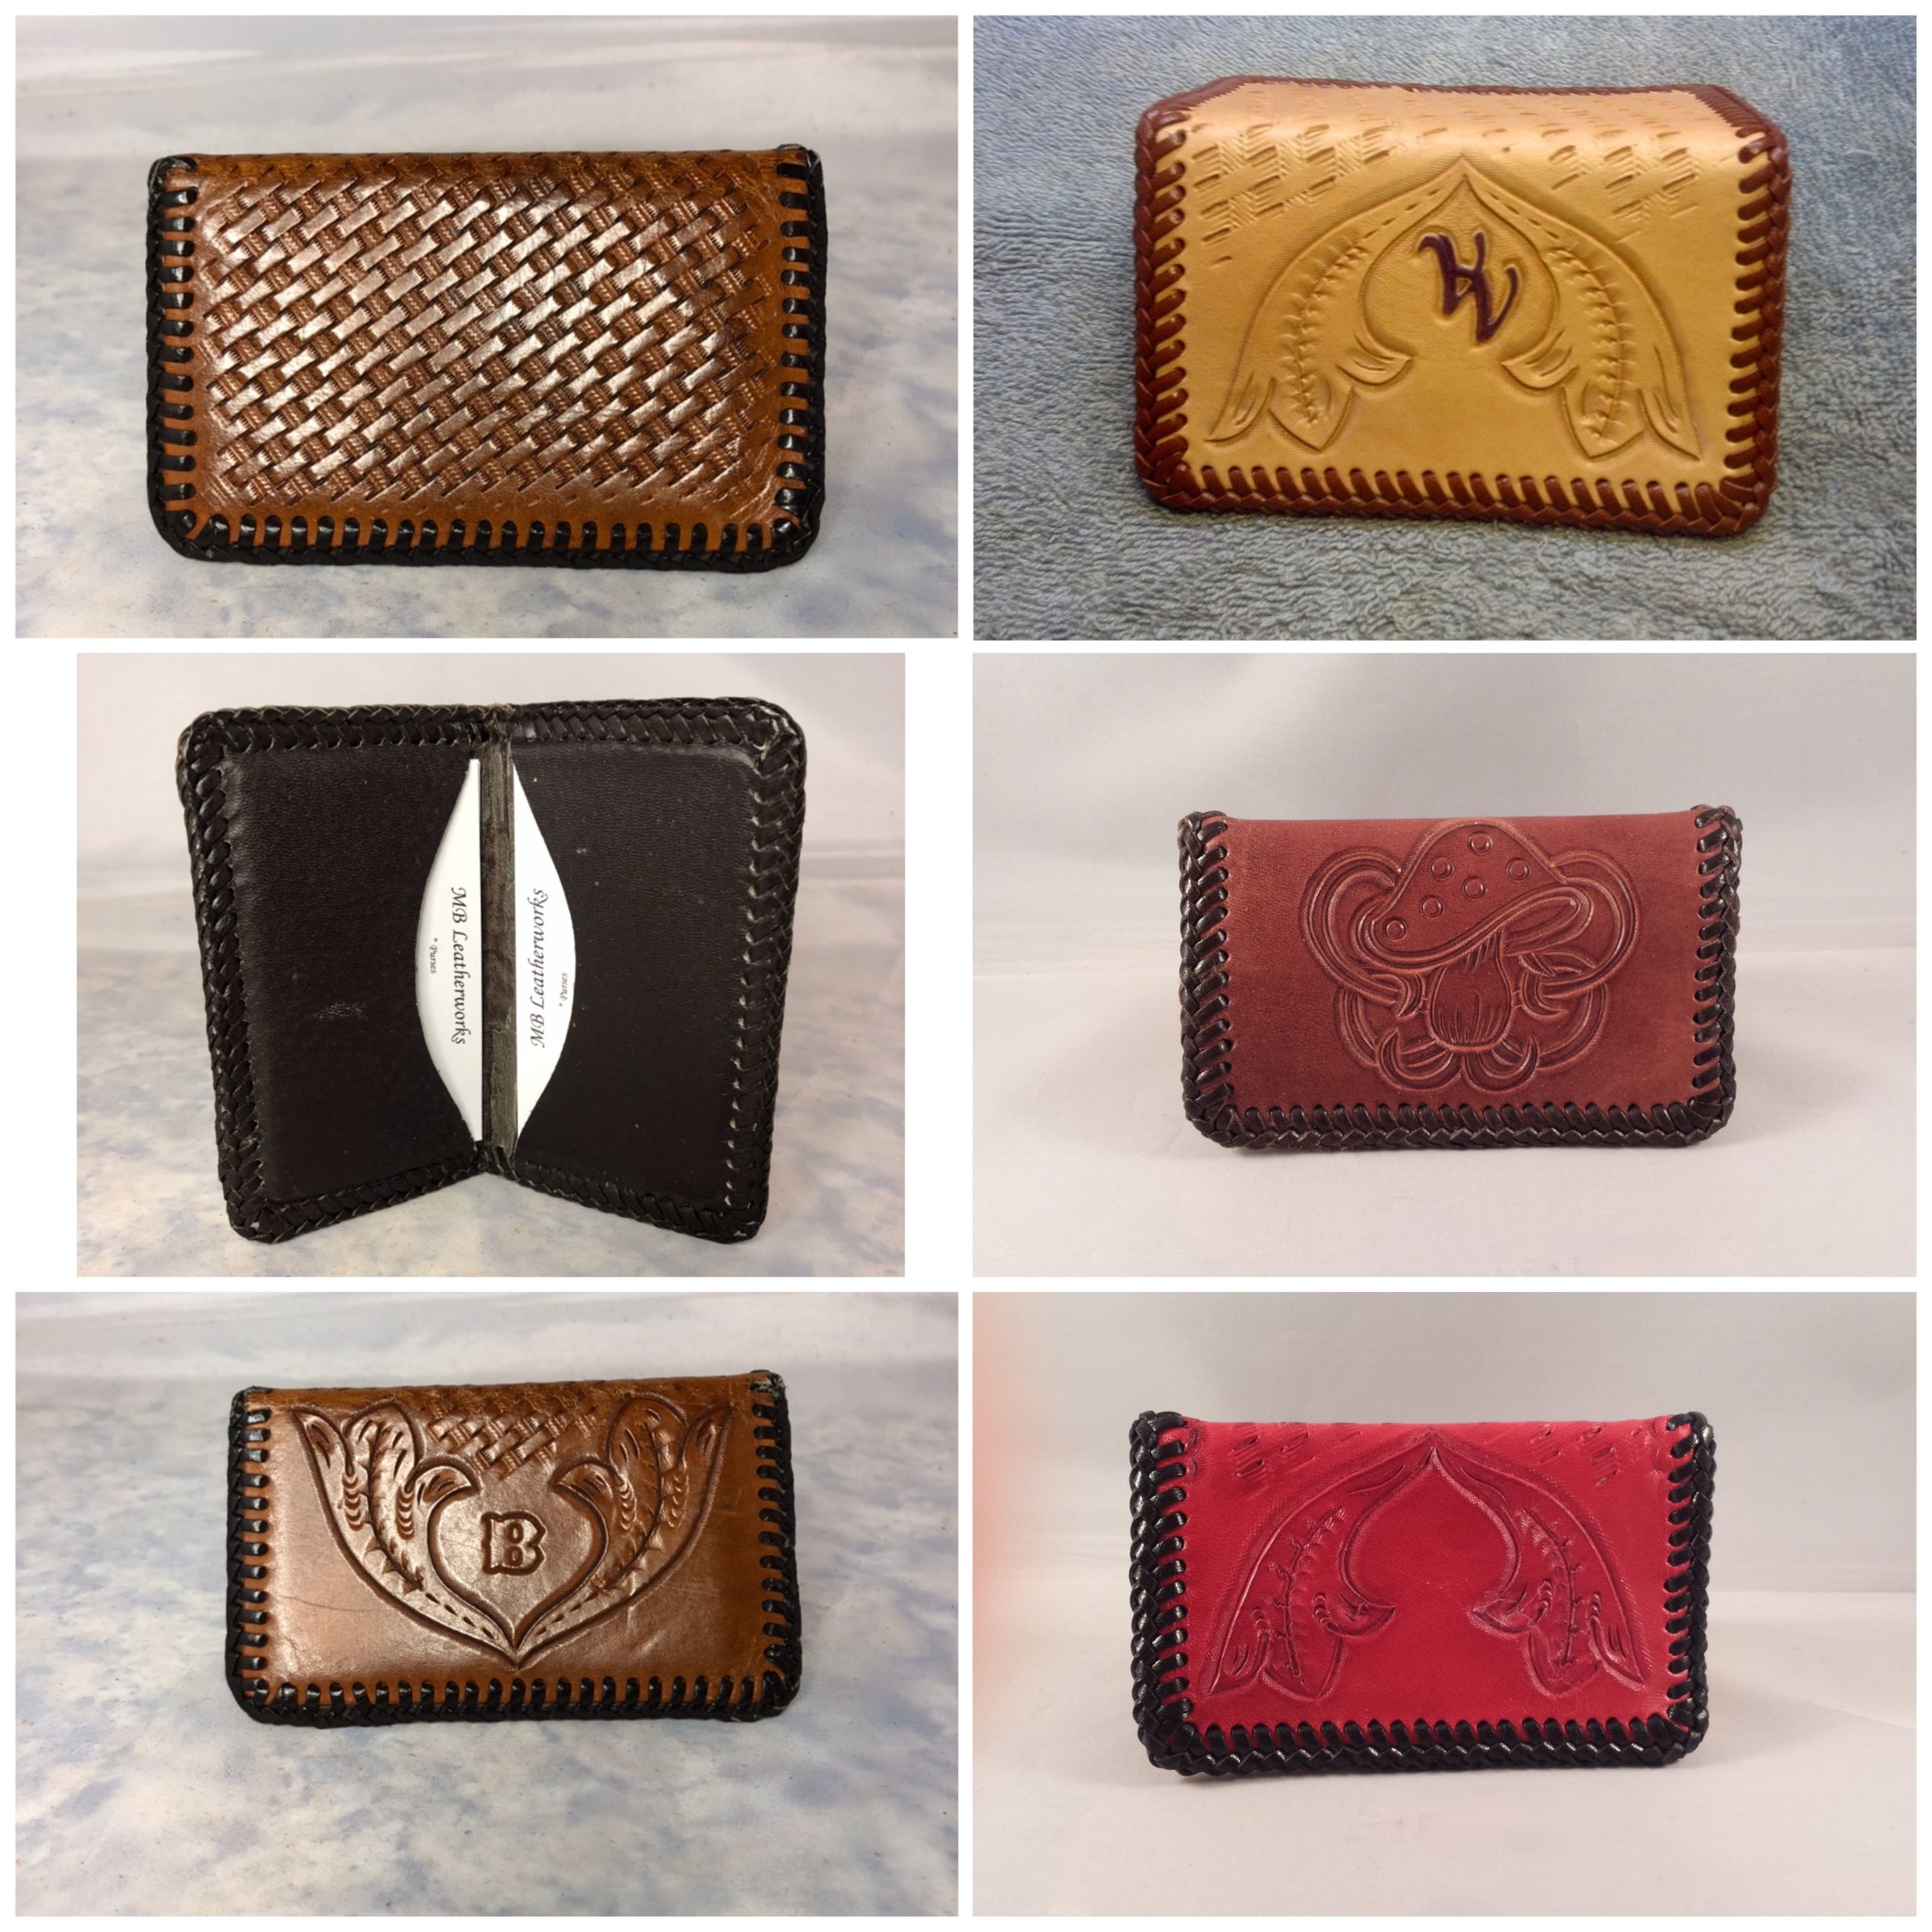 Home  Lone Star Leathercrafts